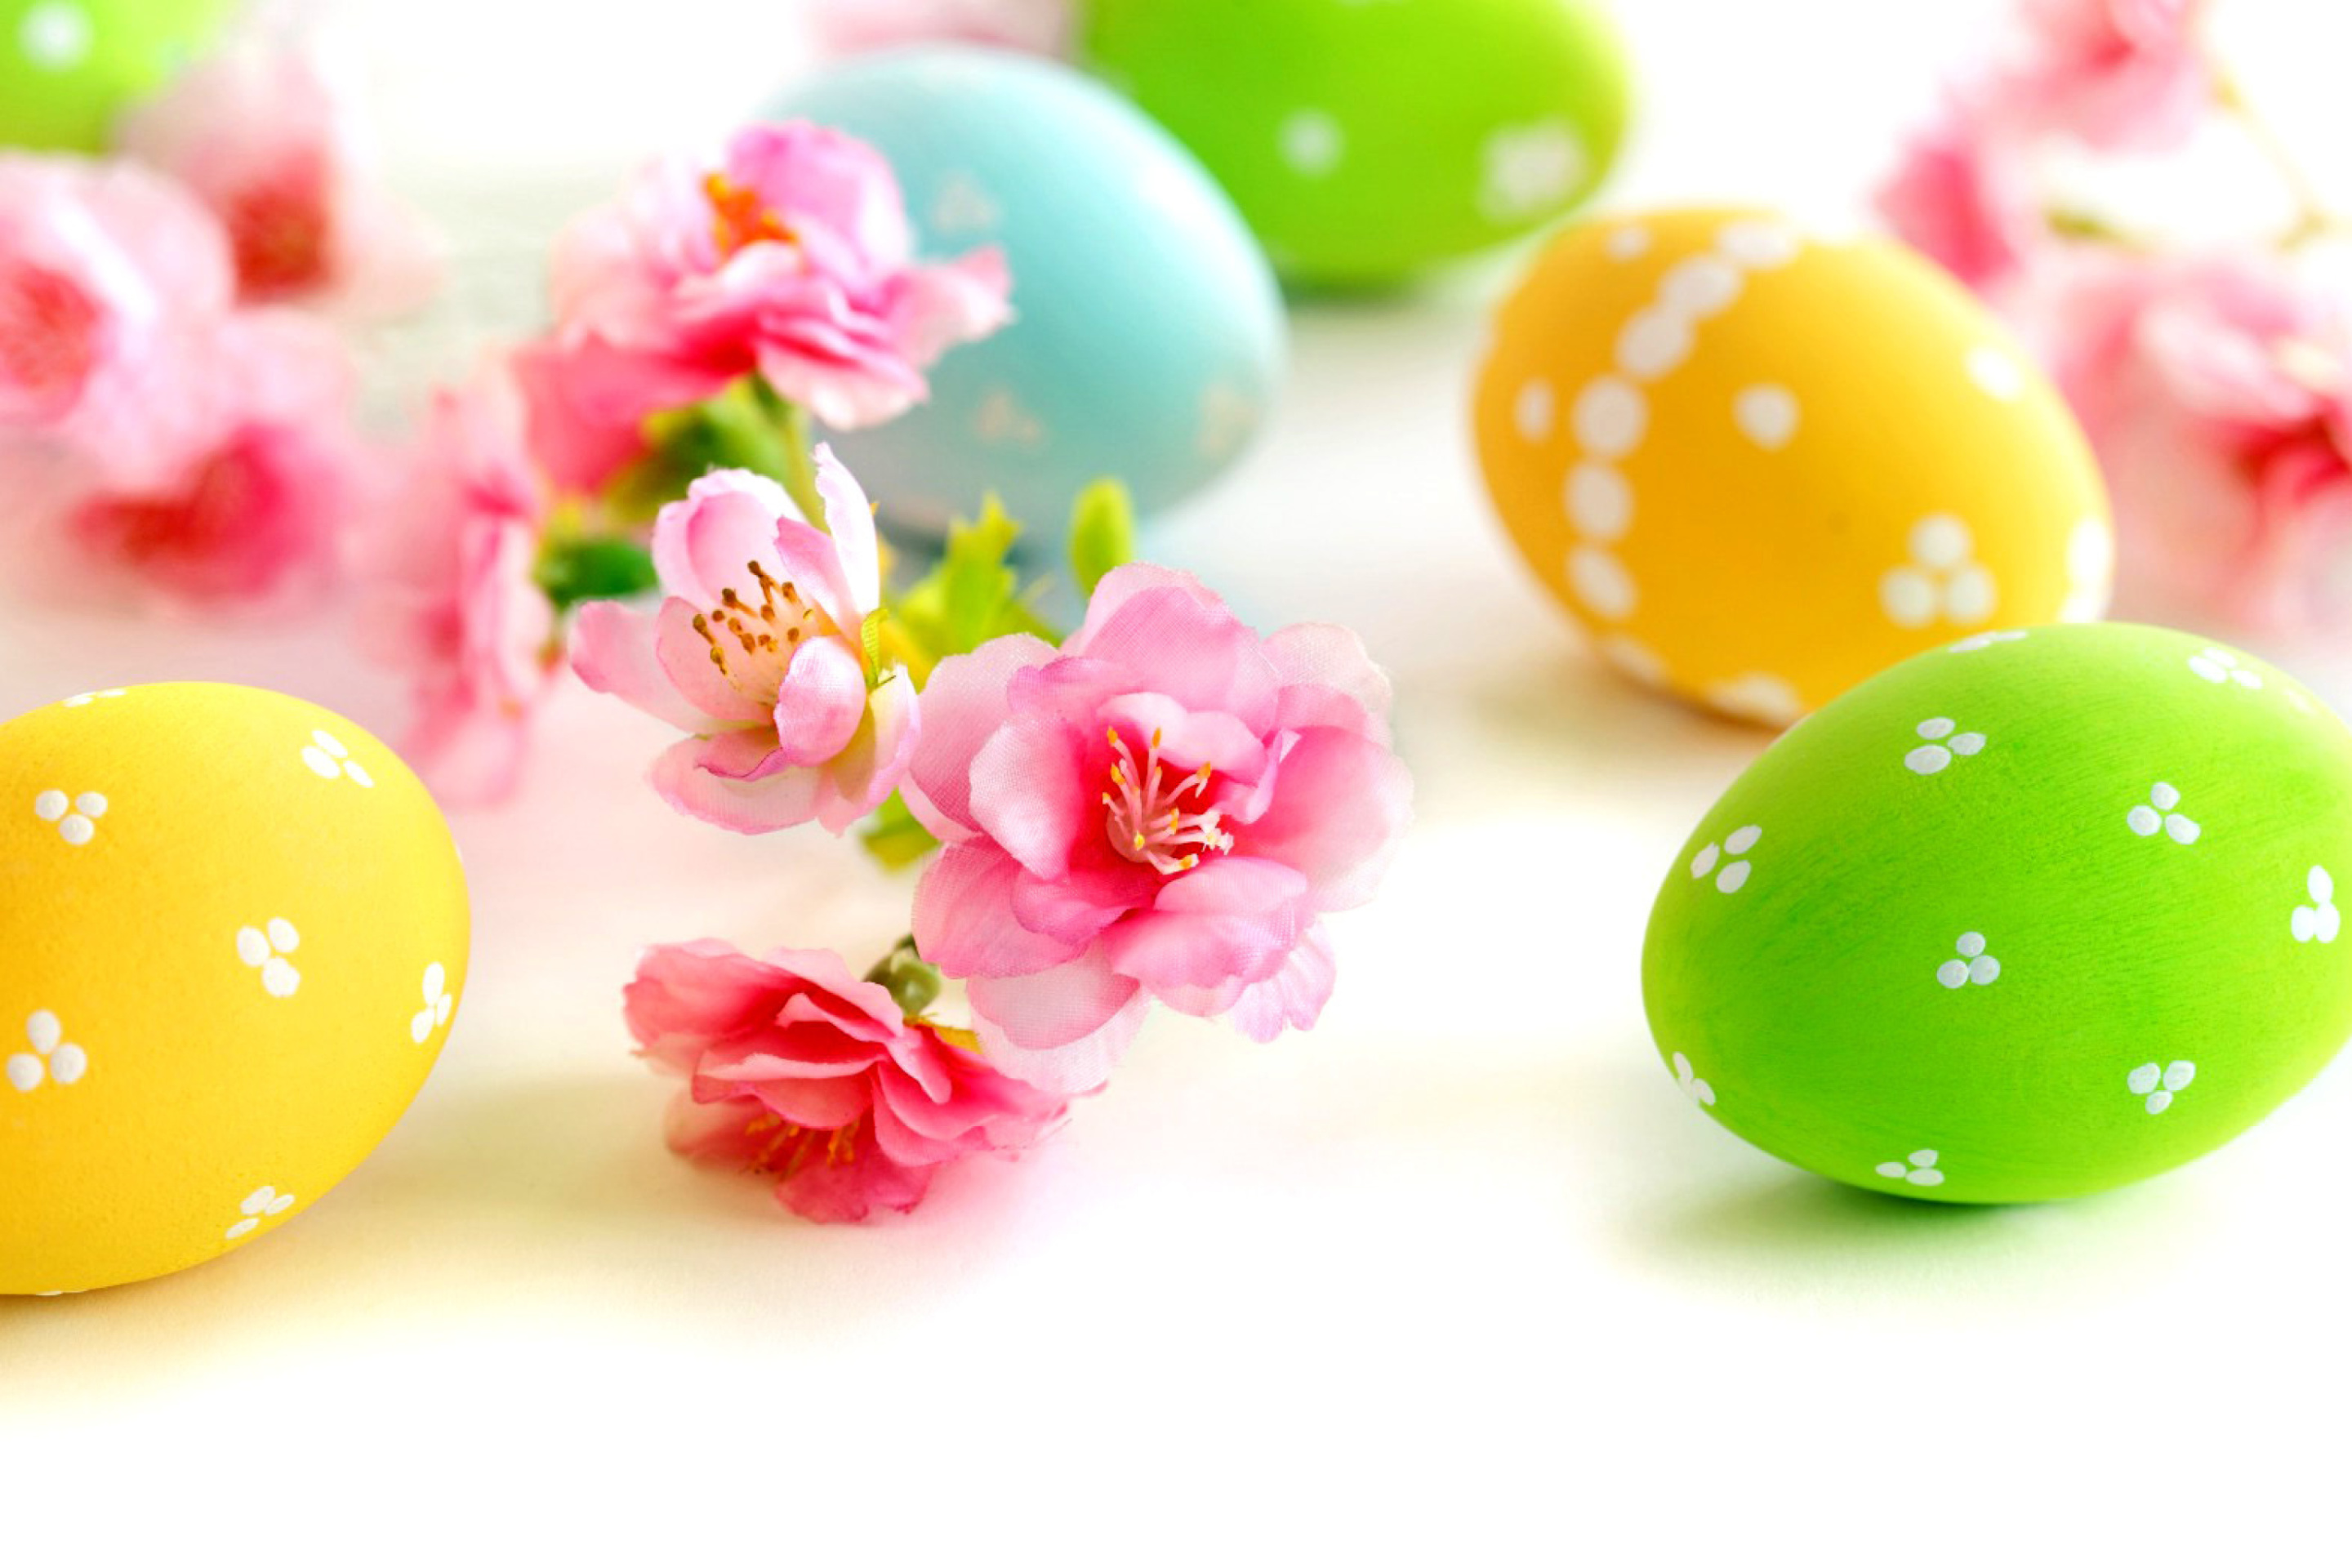 Das Easter Eggs and Spring Flowers Wallpaper 2880x1920